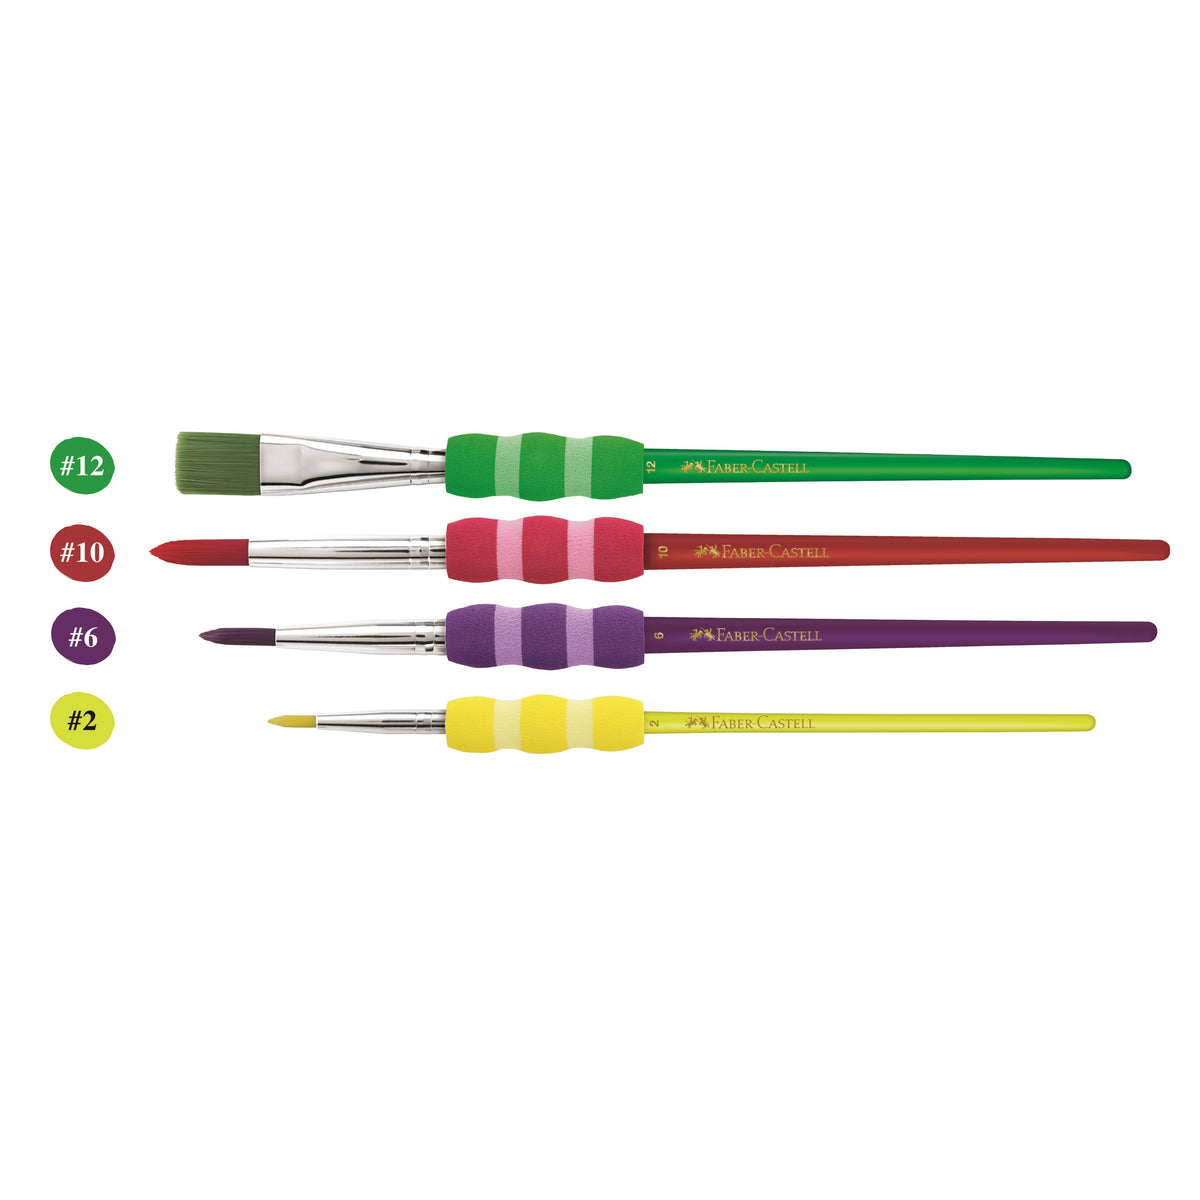 An image showing 4 Faber Castell paint brushes. The brushes are different colours and widths with a comfortable grip on each.